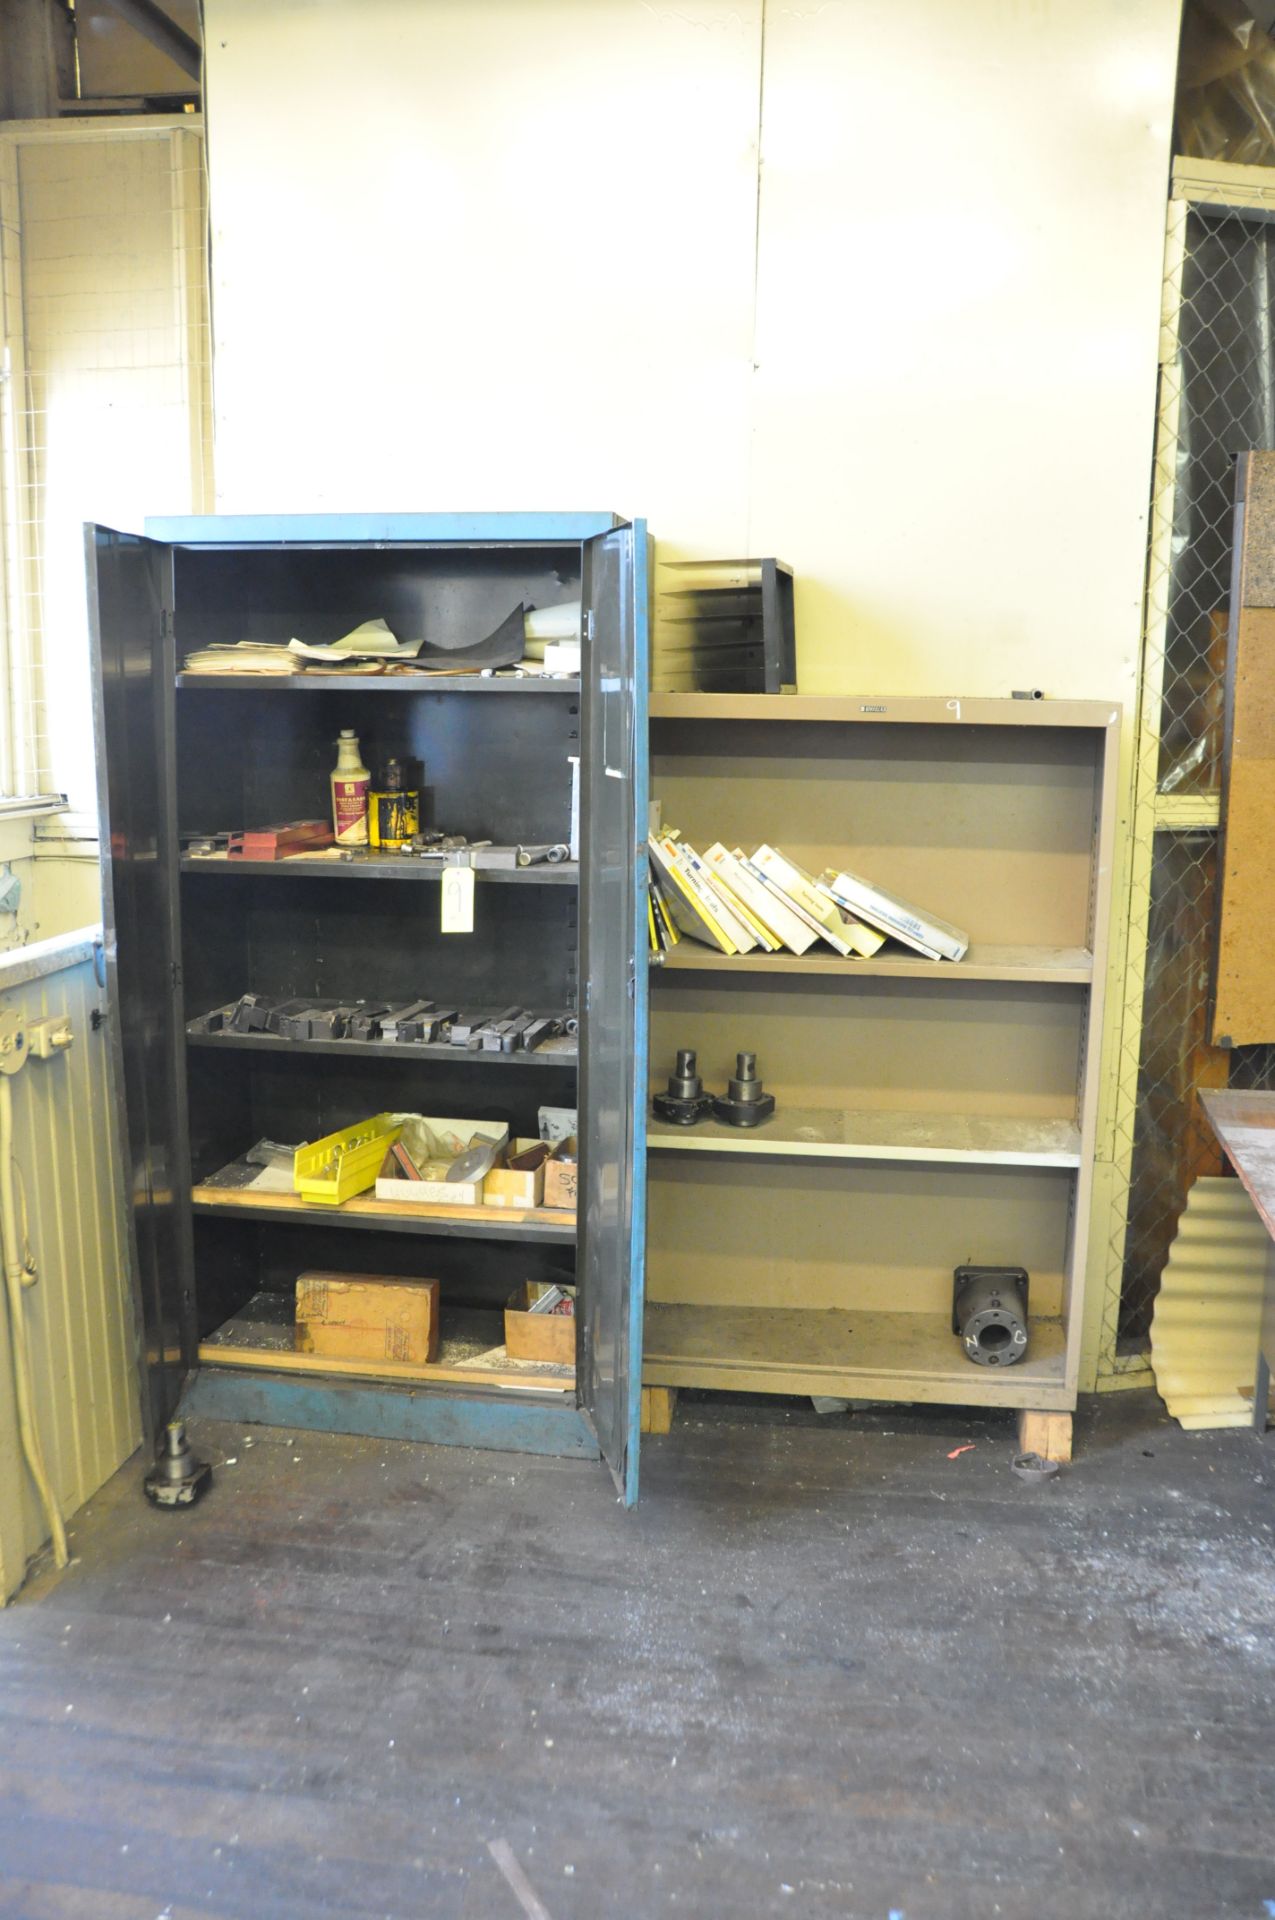 BLUE METAL 2 DOOR CABINET WITH ASSORTED CONTENTS AND BEIGE METAL BOOK SHELF WITH CONTENTS